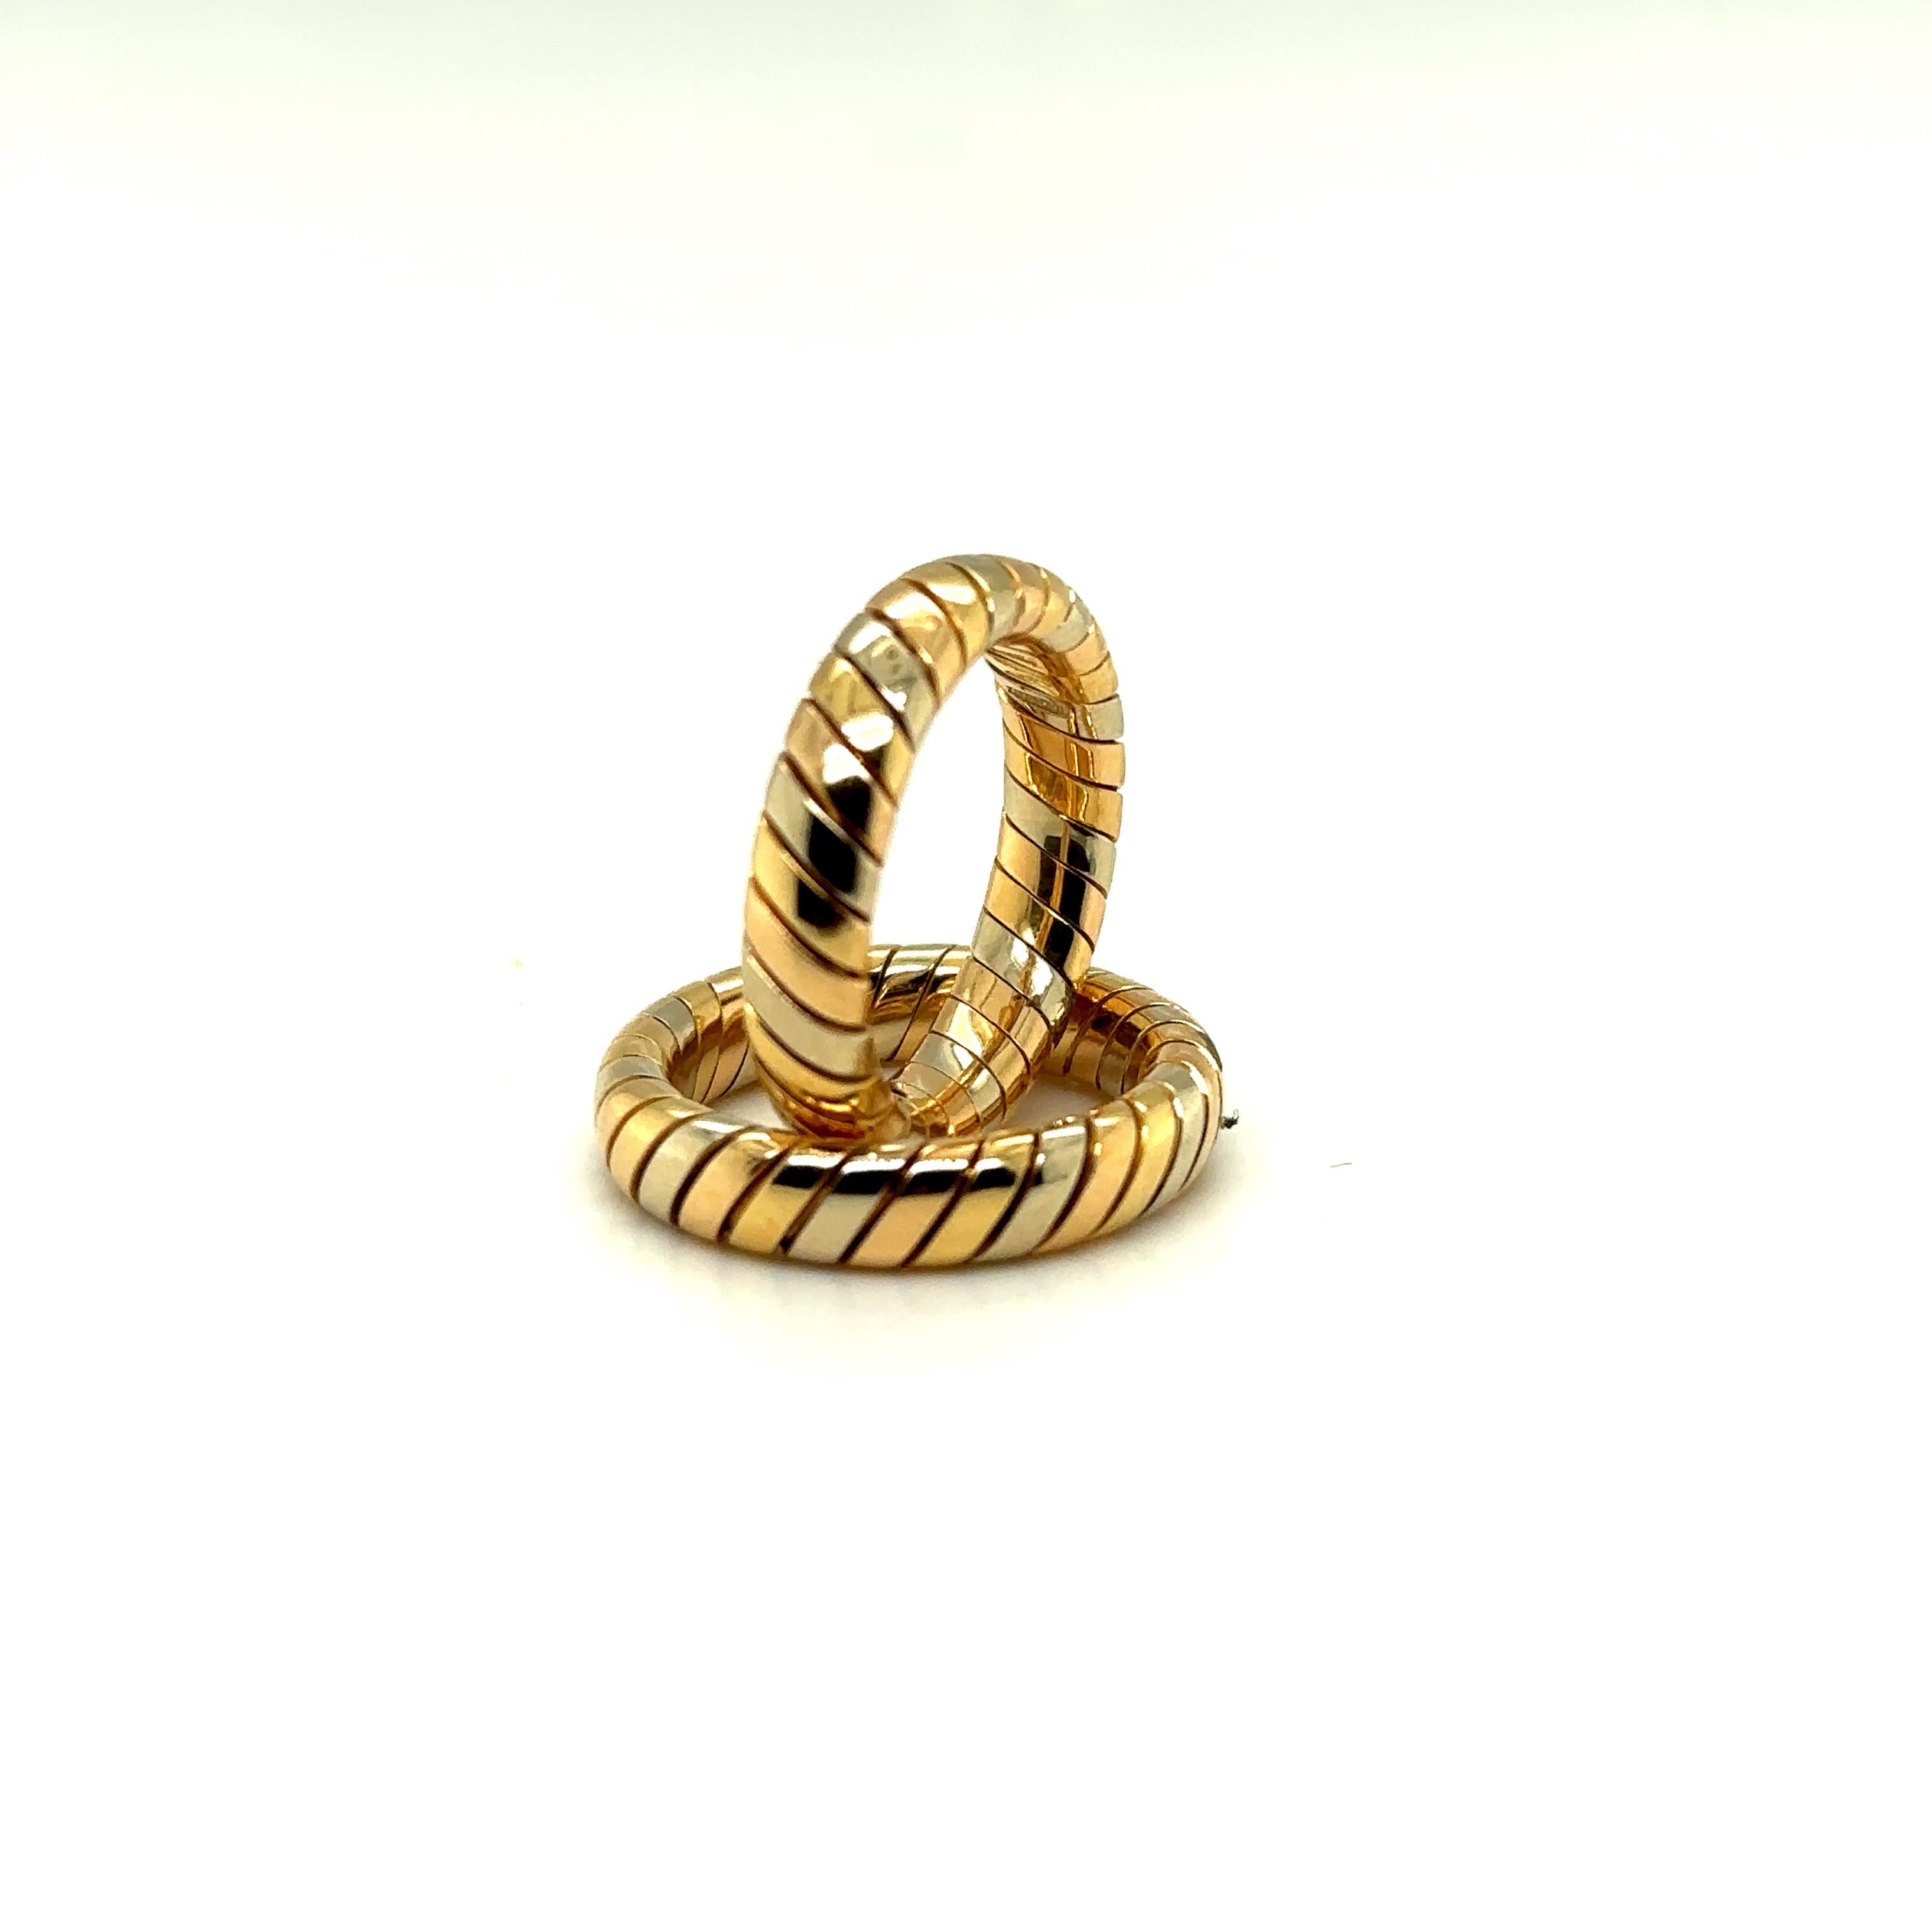 Tubogas style
Of tricolor gold
18k yellow, white, and pink gold
Signed Bulgari
Ring size 6